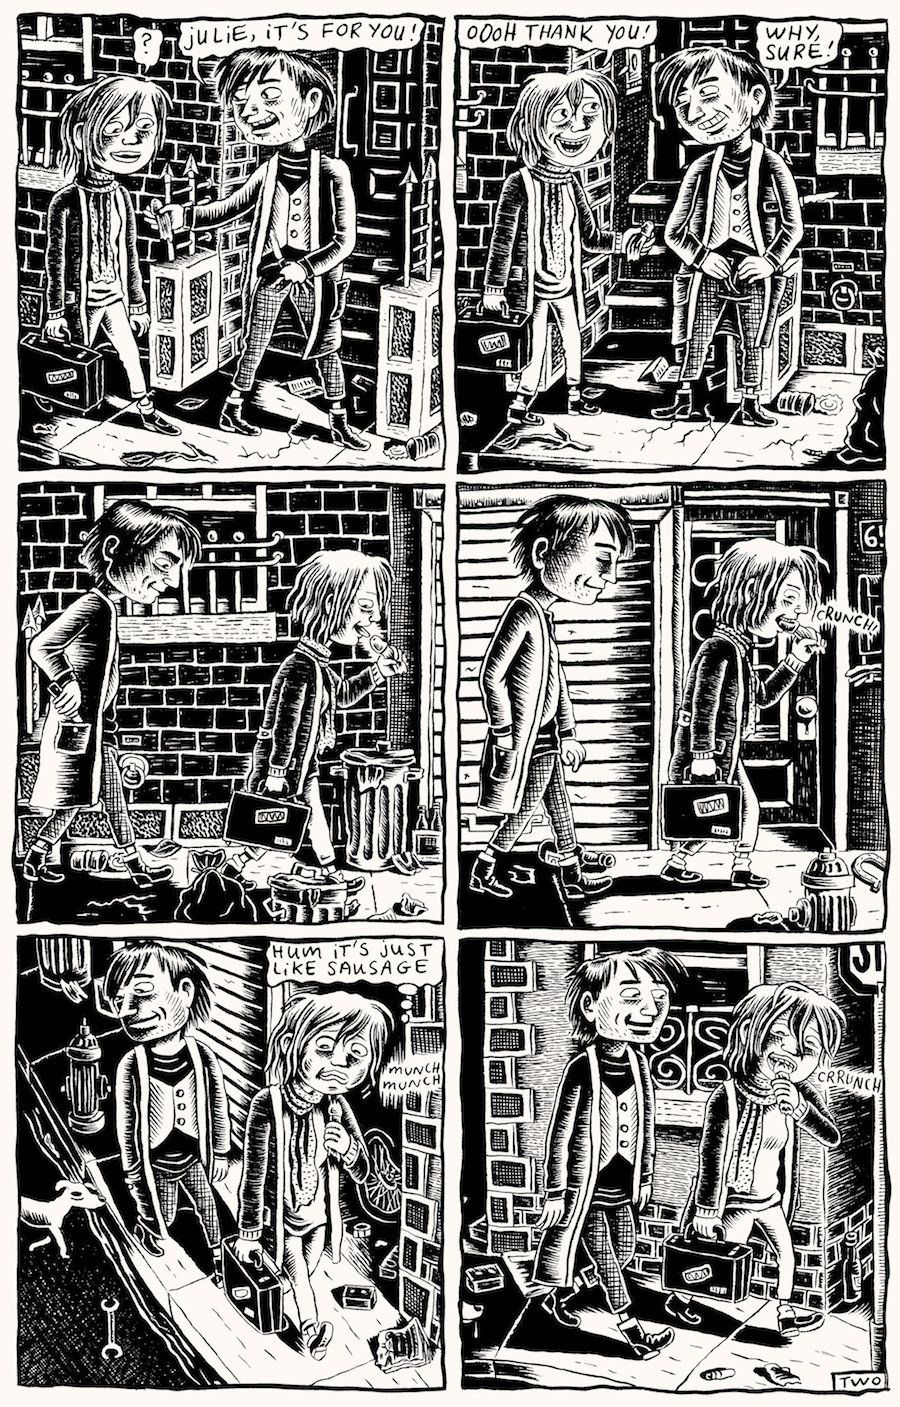 A strip from Doucet’s series of semiautobiographical comics, “Dirty Plotte.”